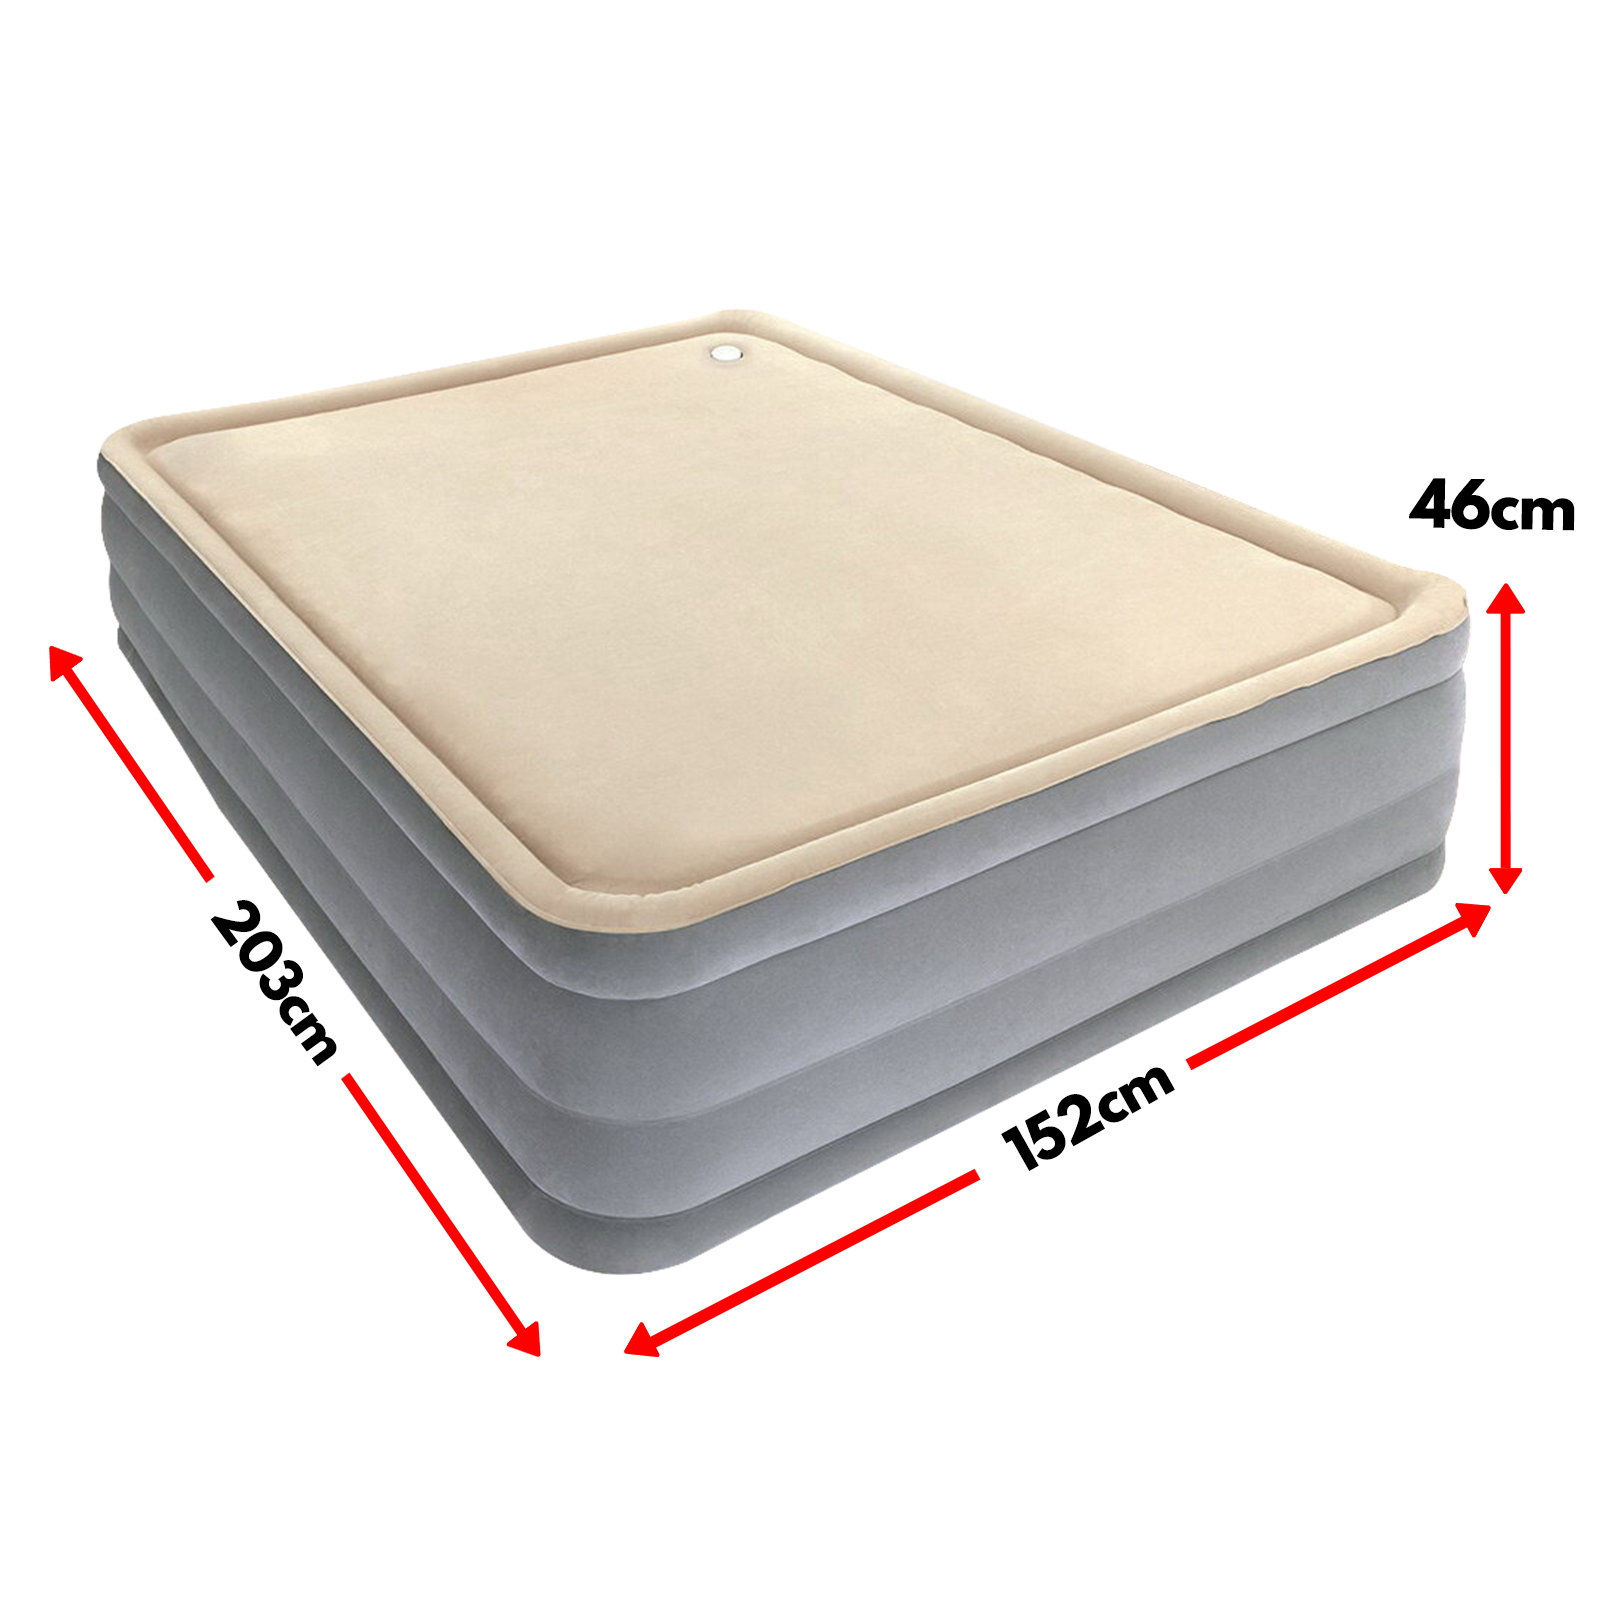 Queen Size Inflatable Air Bed Mattress with Built-in Pump- Grey & Beige